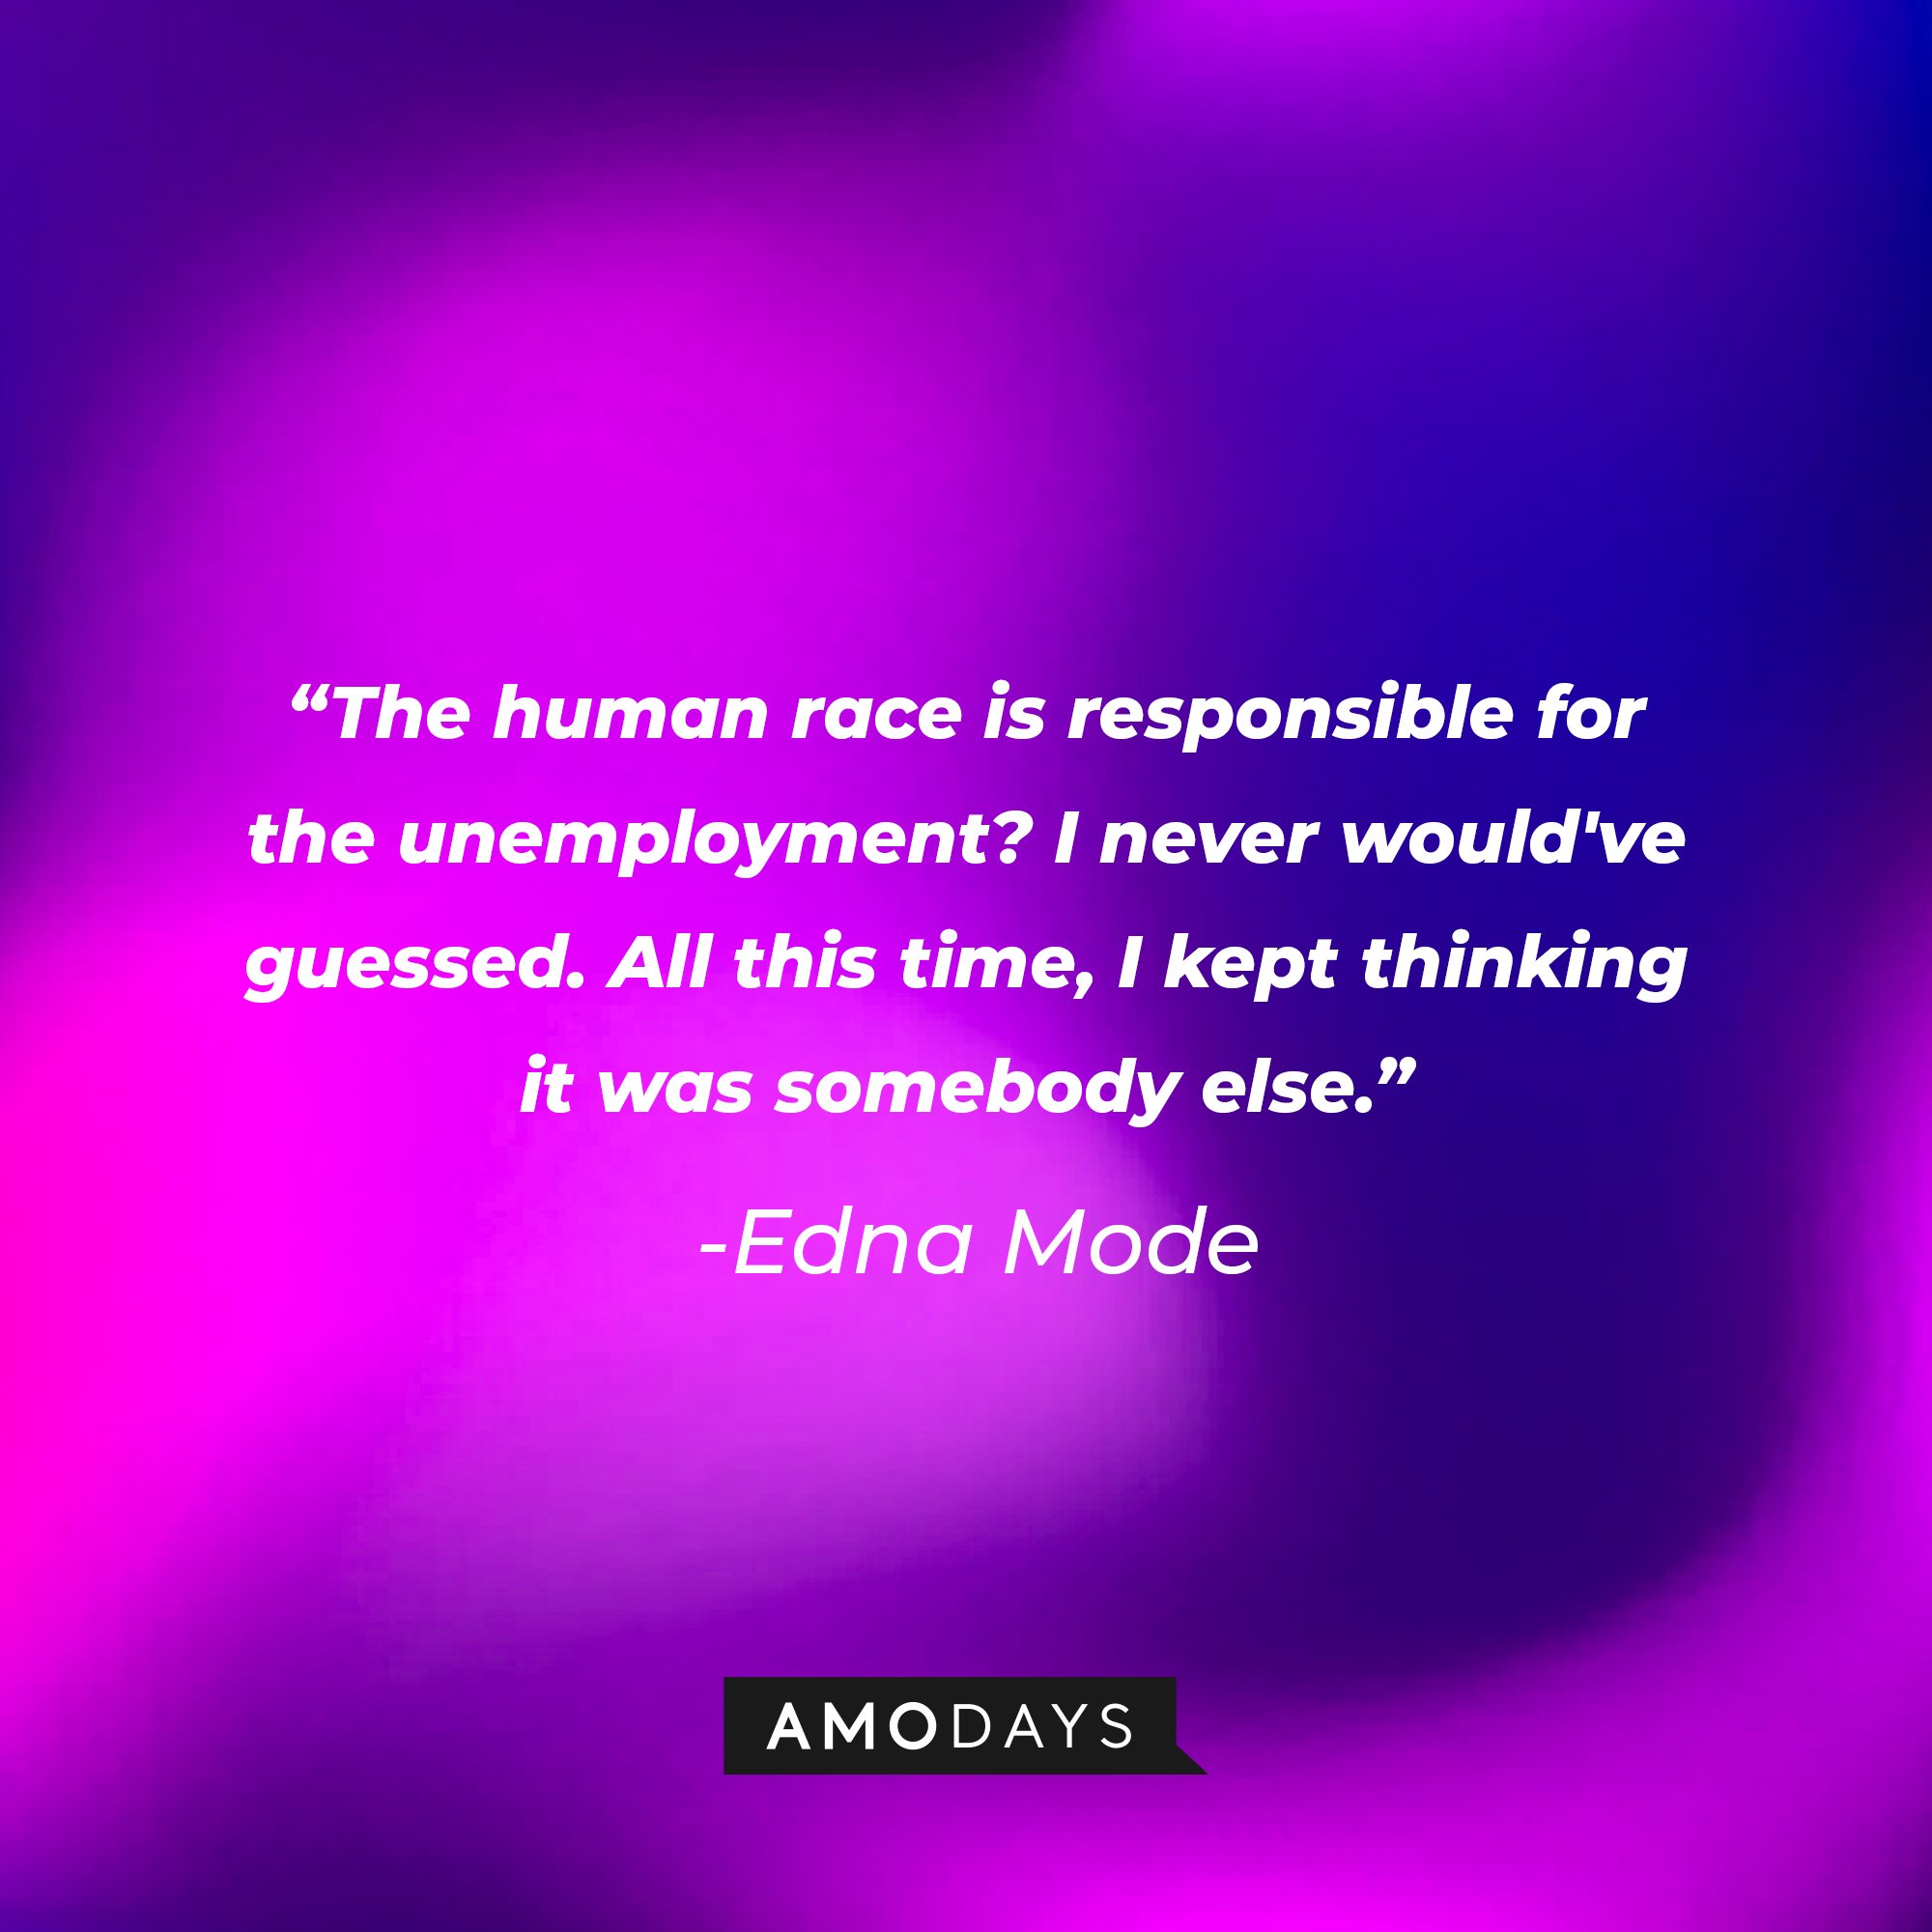  Edna Mode’s quote: "The human race is responsible for the unemployment? I never would've guessed. All this time, I kept thinking it was somebody else." | Image: AmoDays